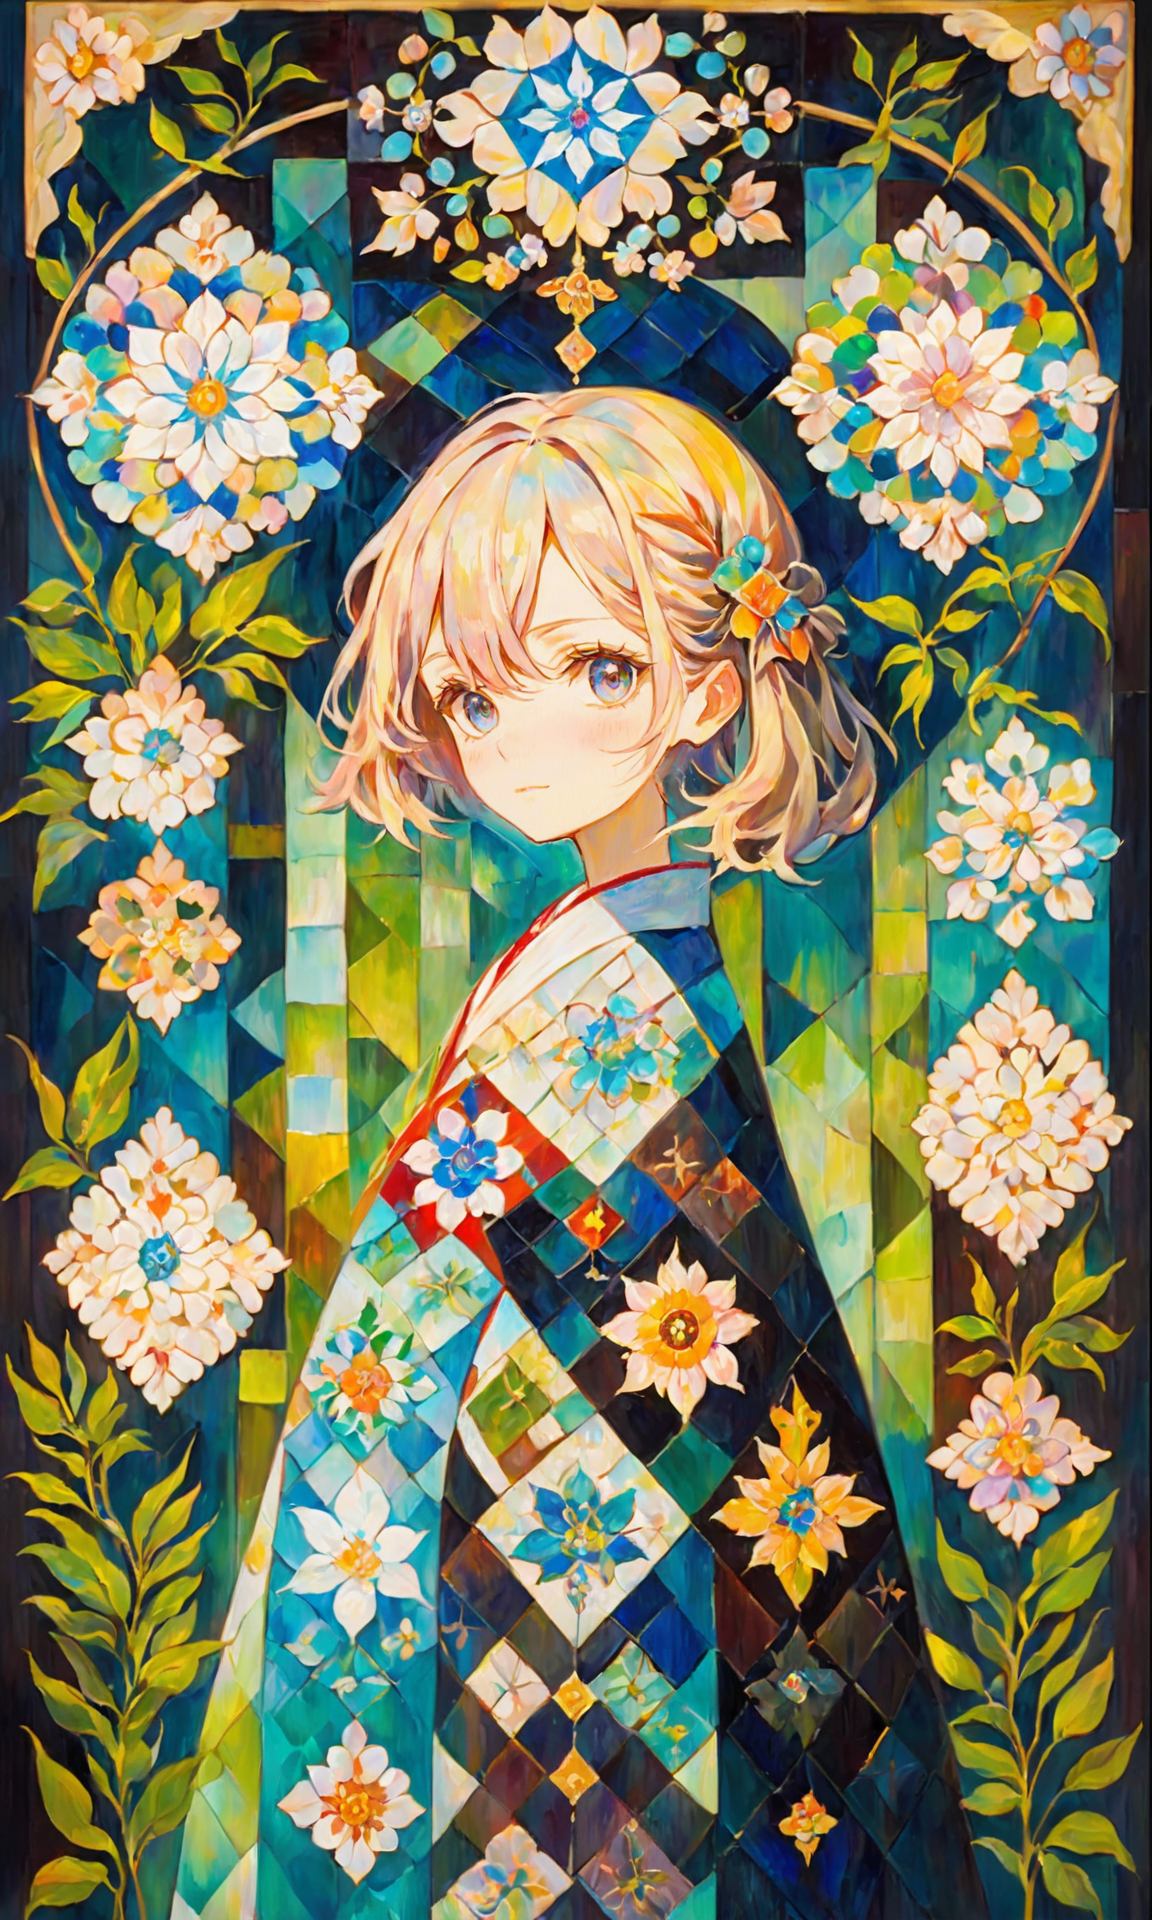 Oil painting, patchwork, Anime of a Supernatural Female of Tranquility